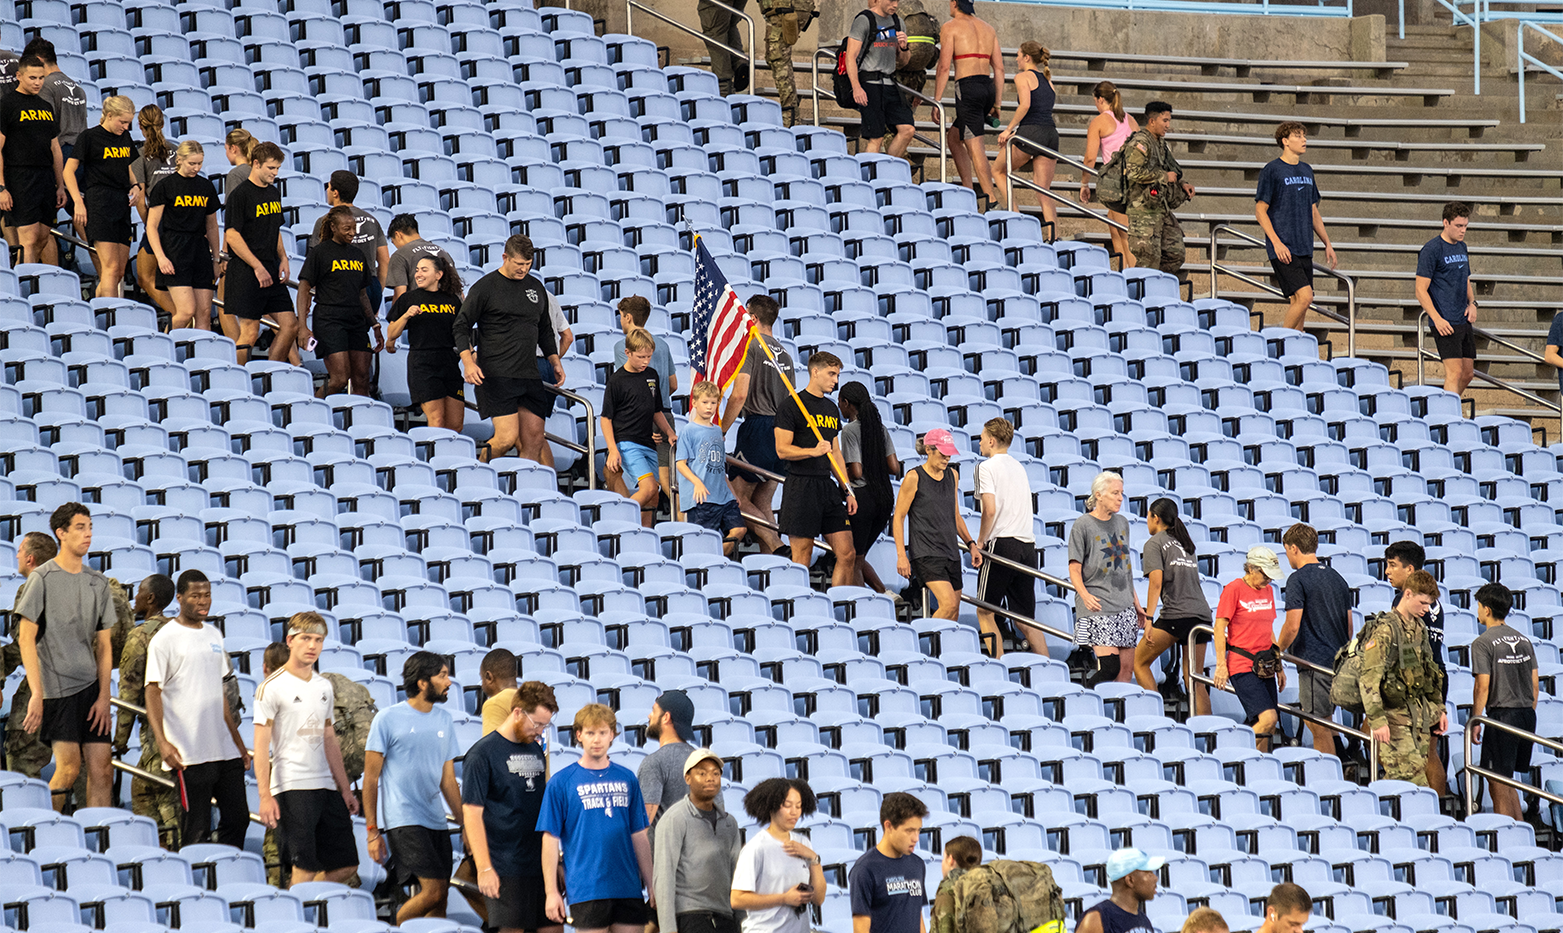 A large group of people, including some military members in army fatigues and black shirts reading 